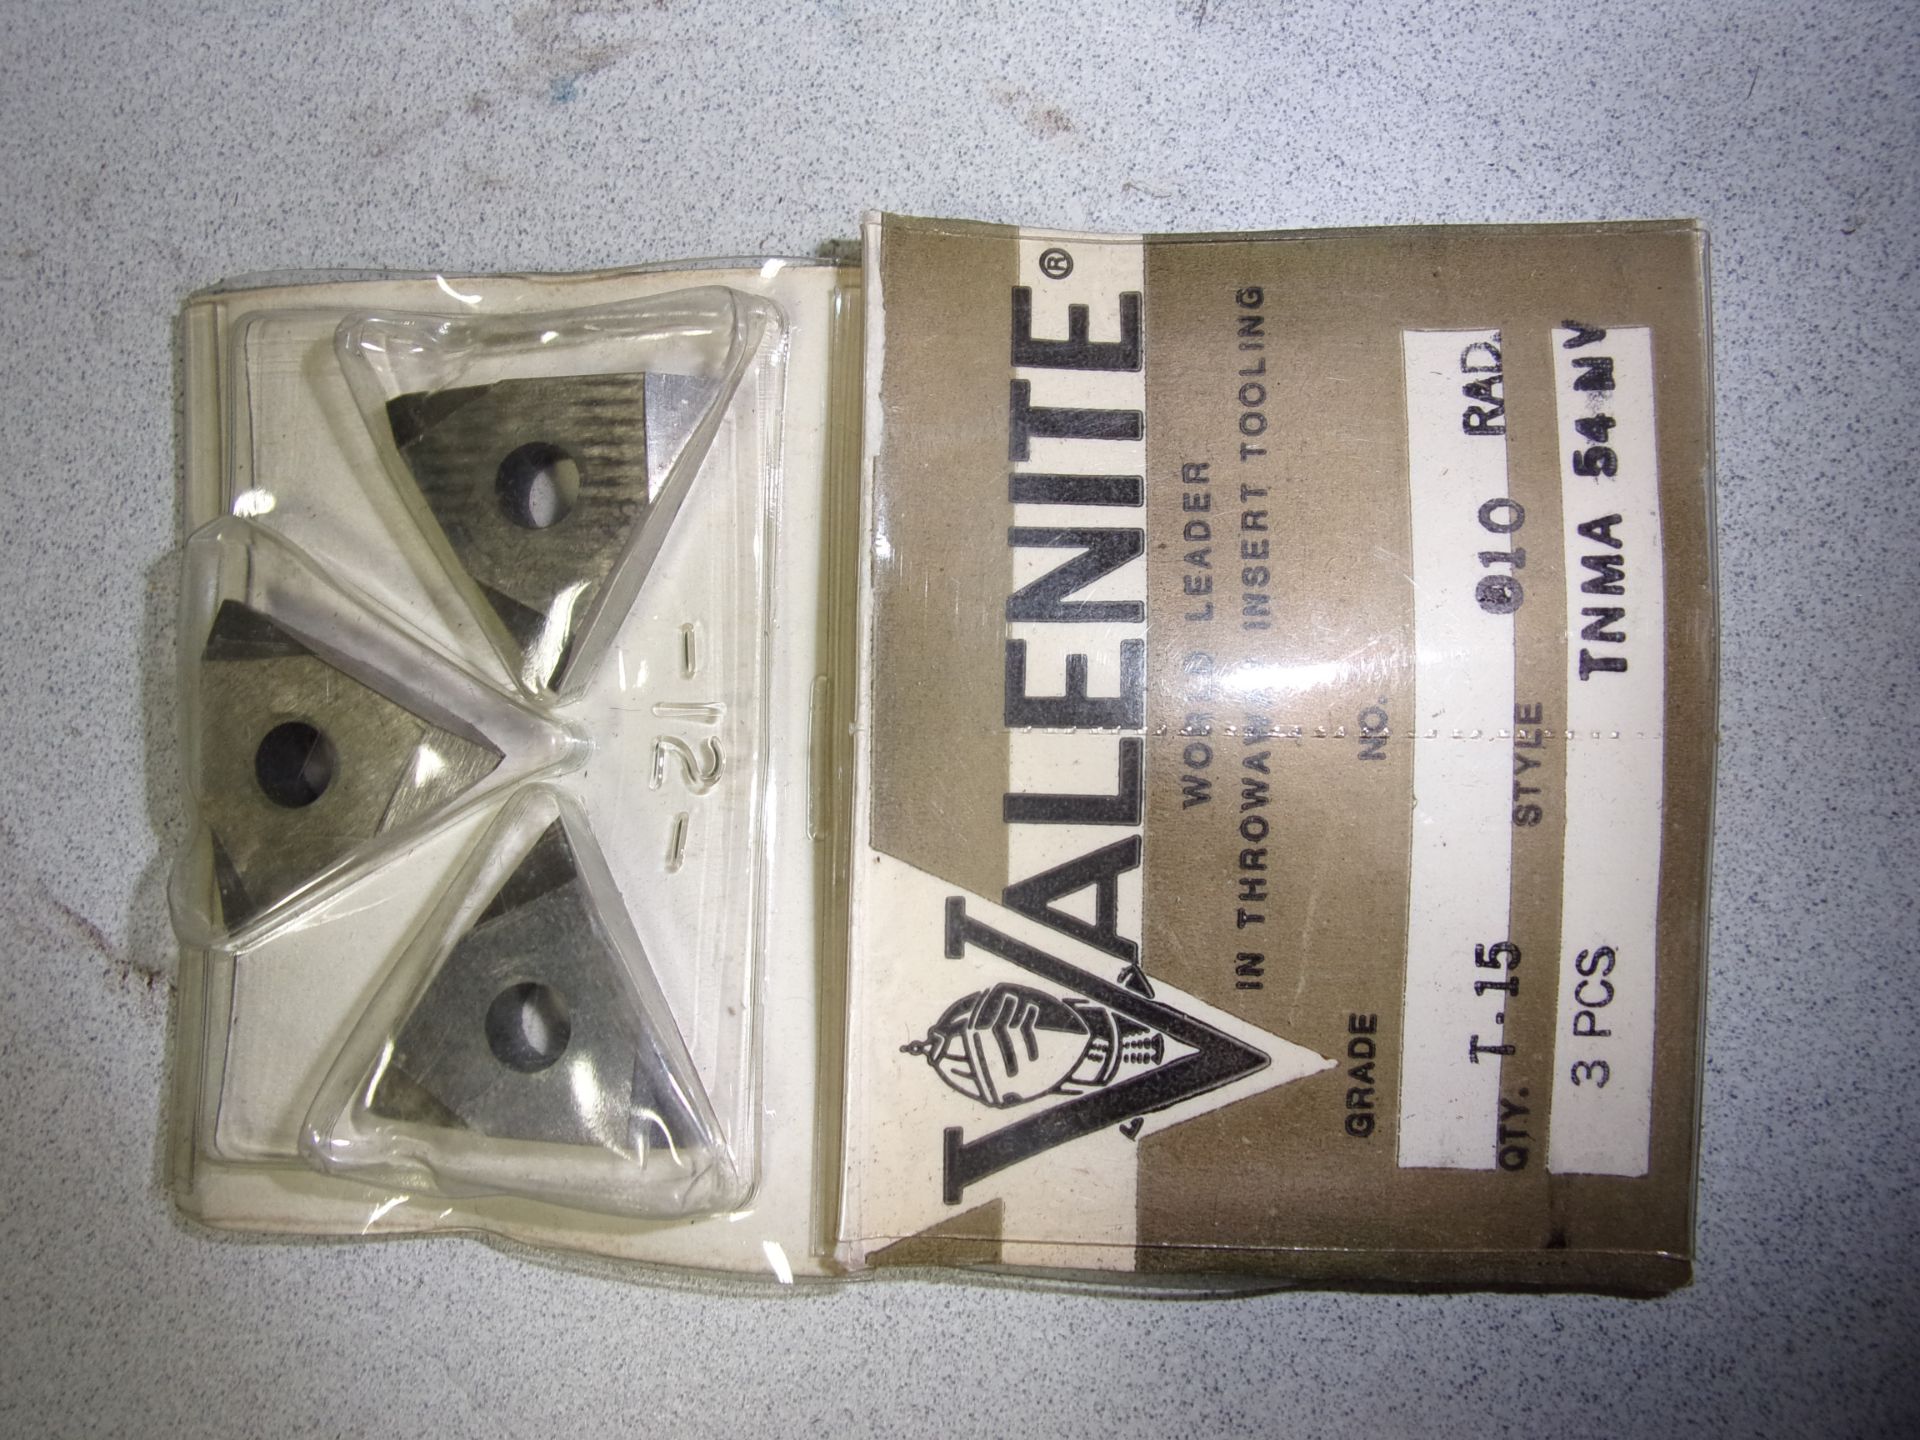 LOT OF (12 PACKS OF 3) VALENITE CARBIDE INSETS, GRADE T-15 WITH 010 RADIUS TNMA54 - Image 2 of 2